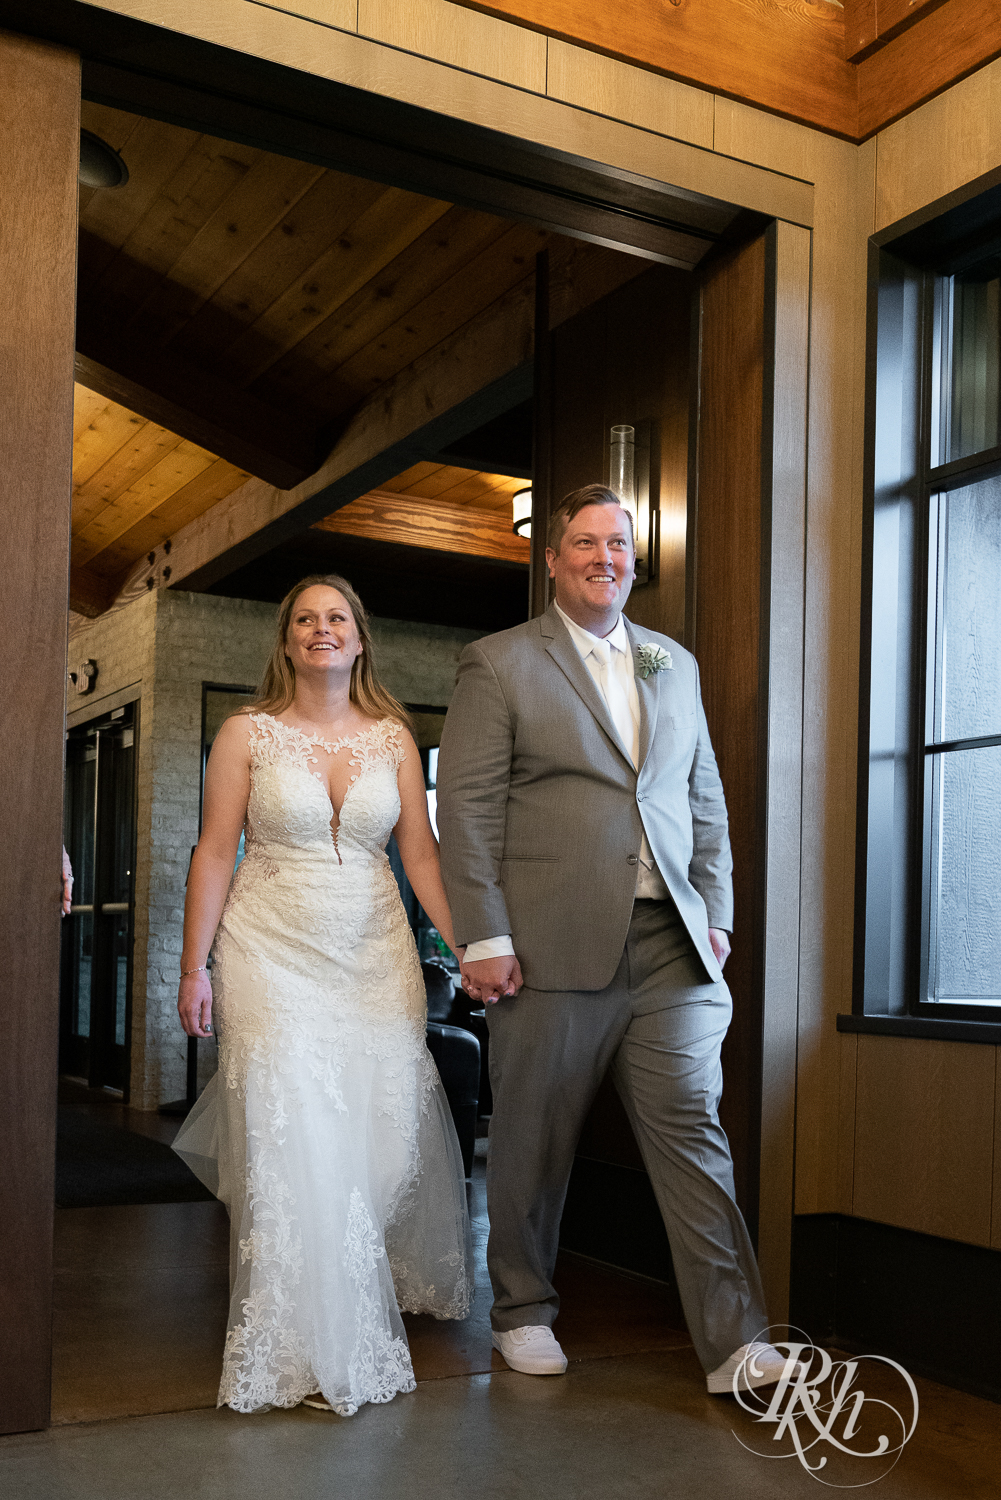 Bride and groom doing grand entrance for wedding reception at 7 Vines Vineyard in Dellwood, Minnesota.